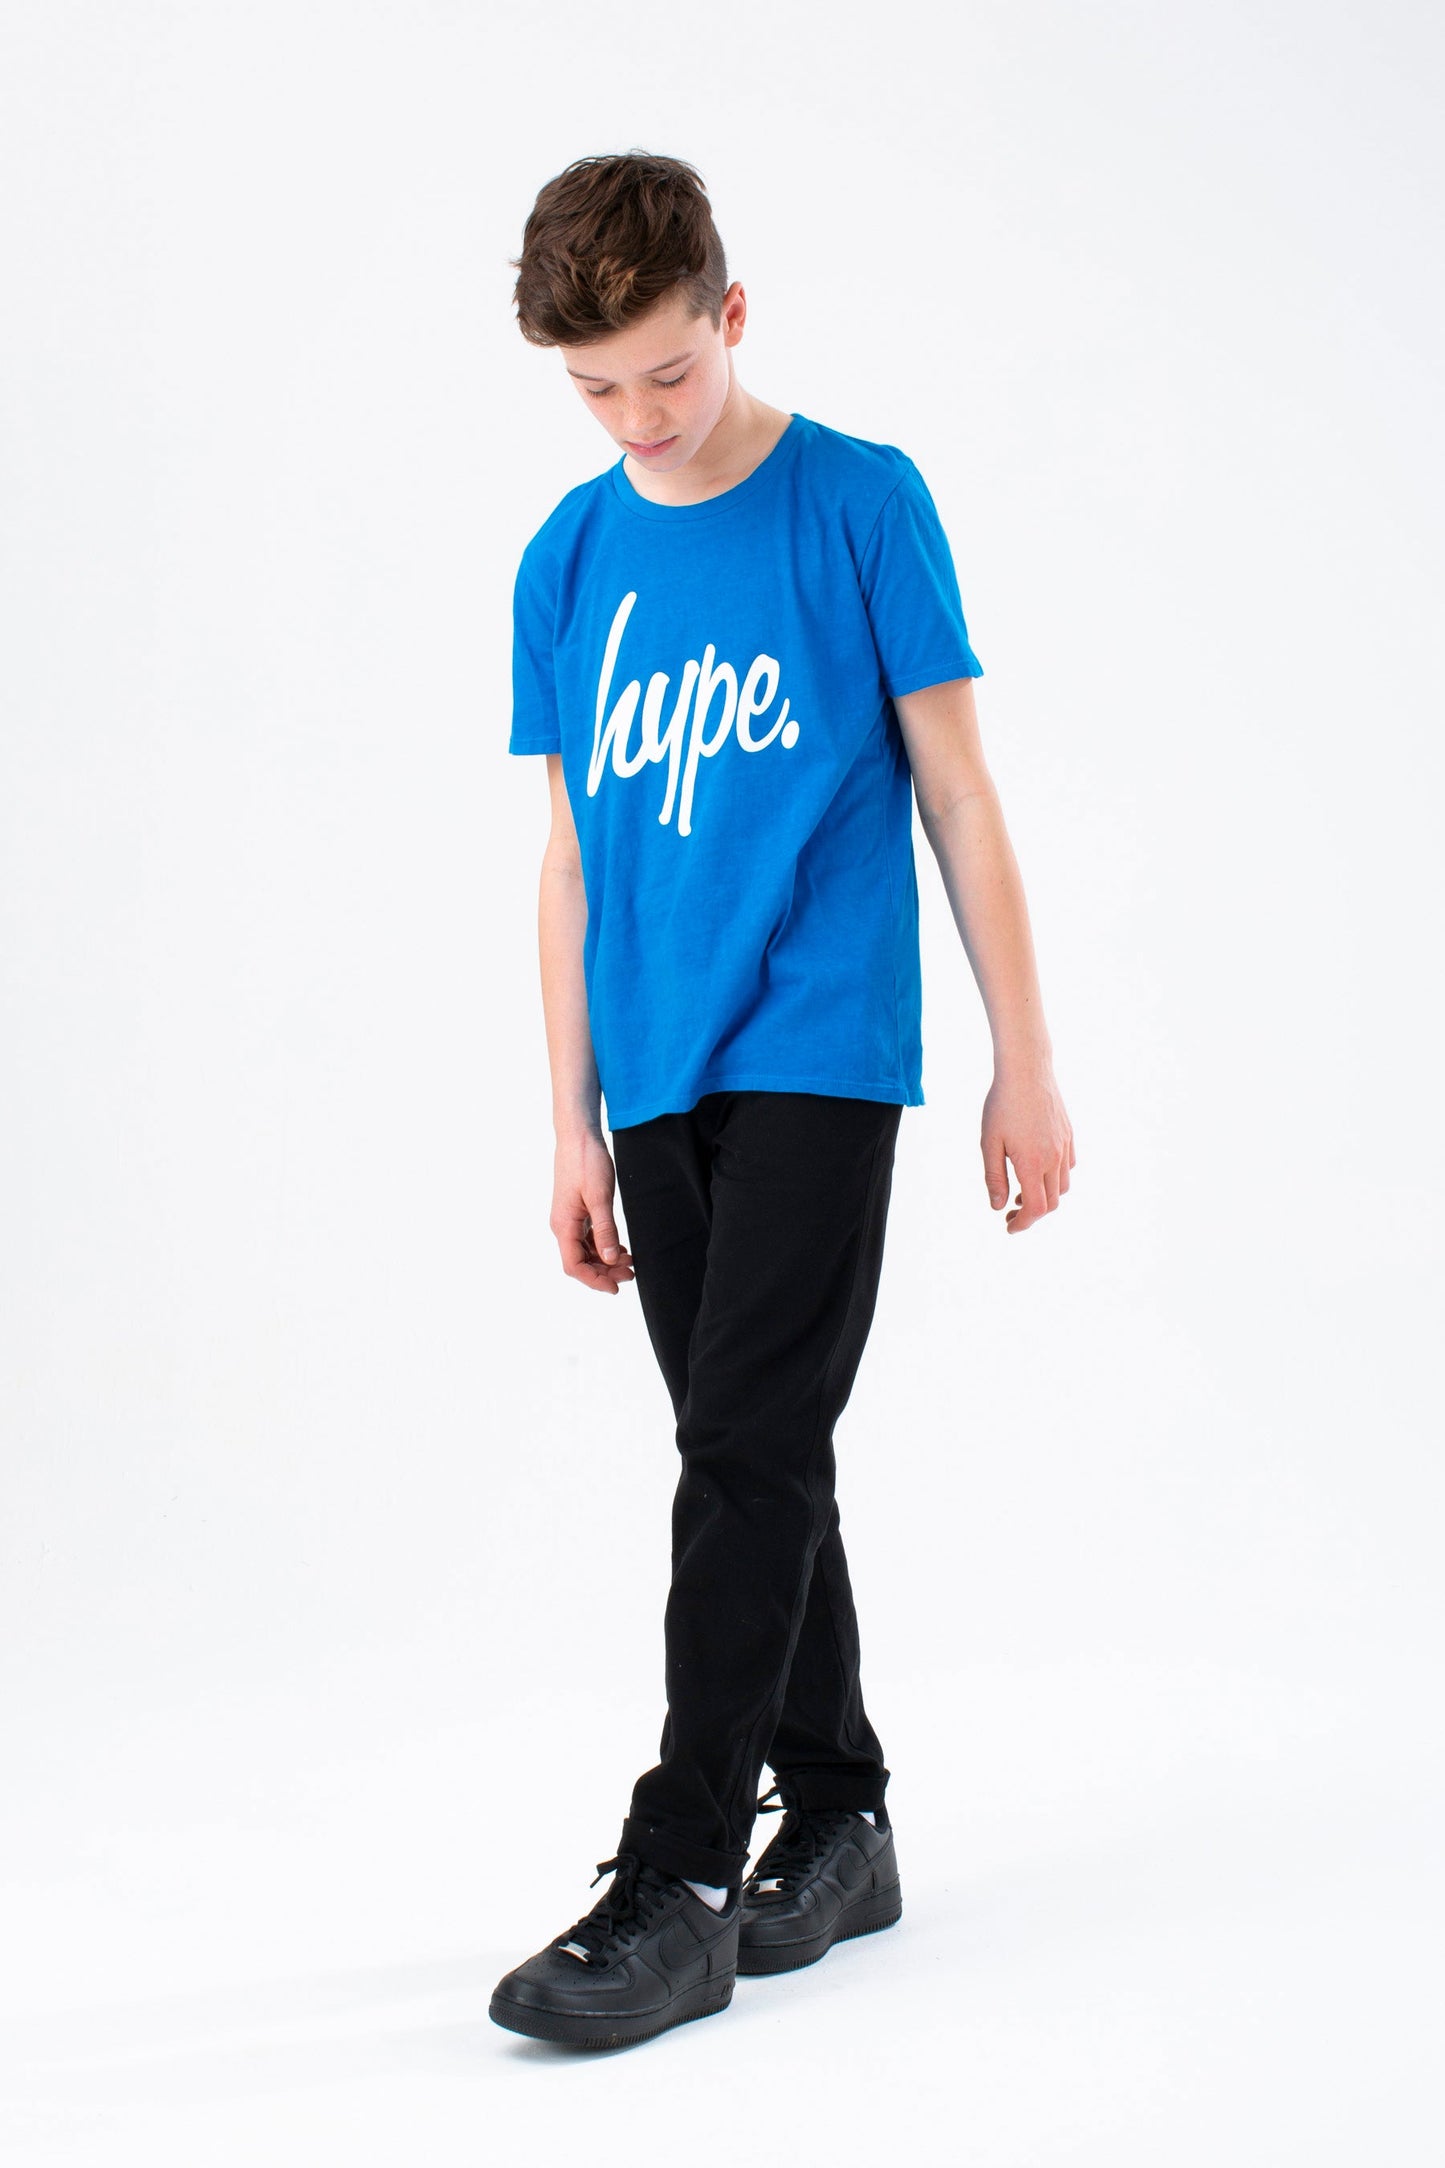 HYPE BOYS NAVY TEAL BLUE 3 PACK OF T-SHIRT